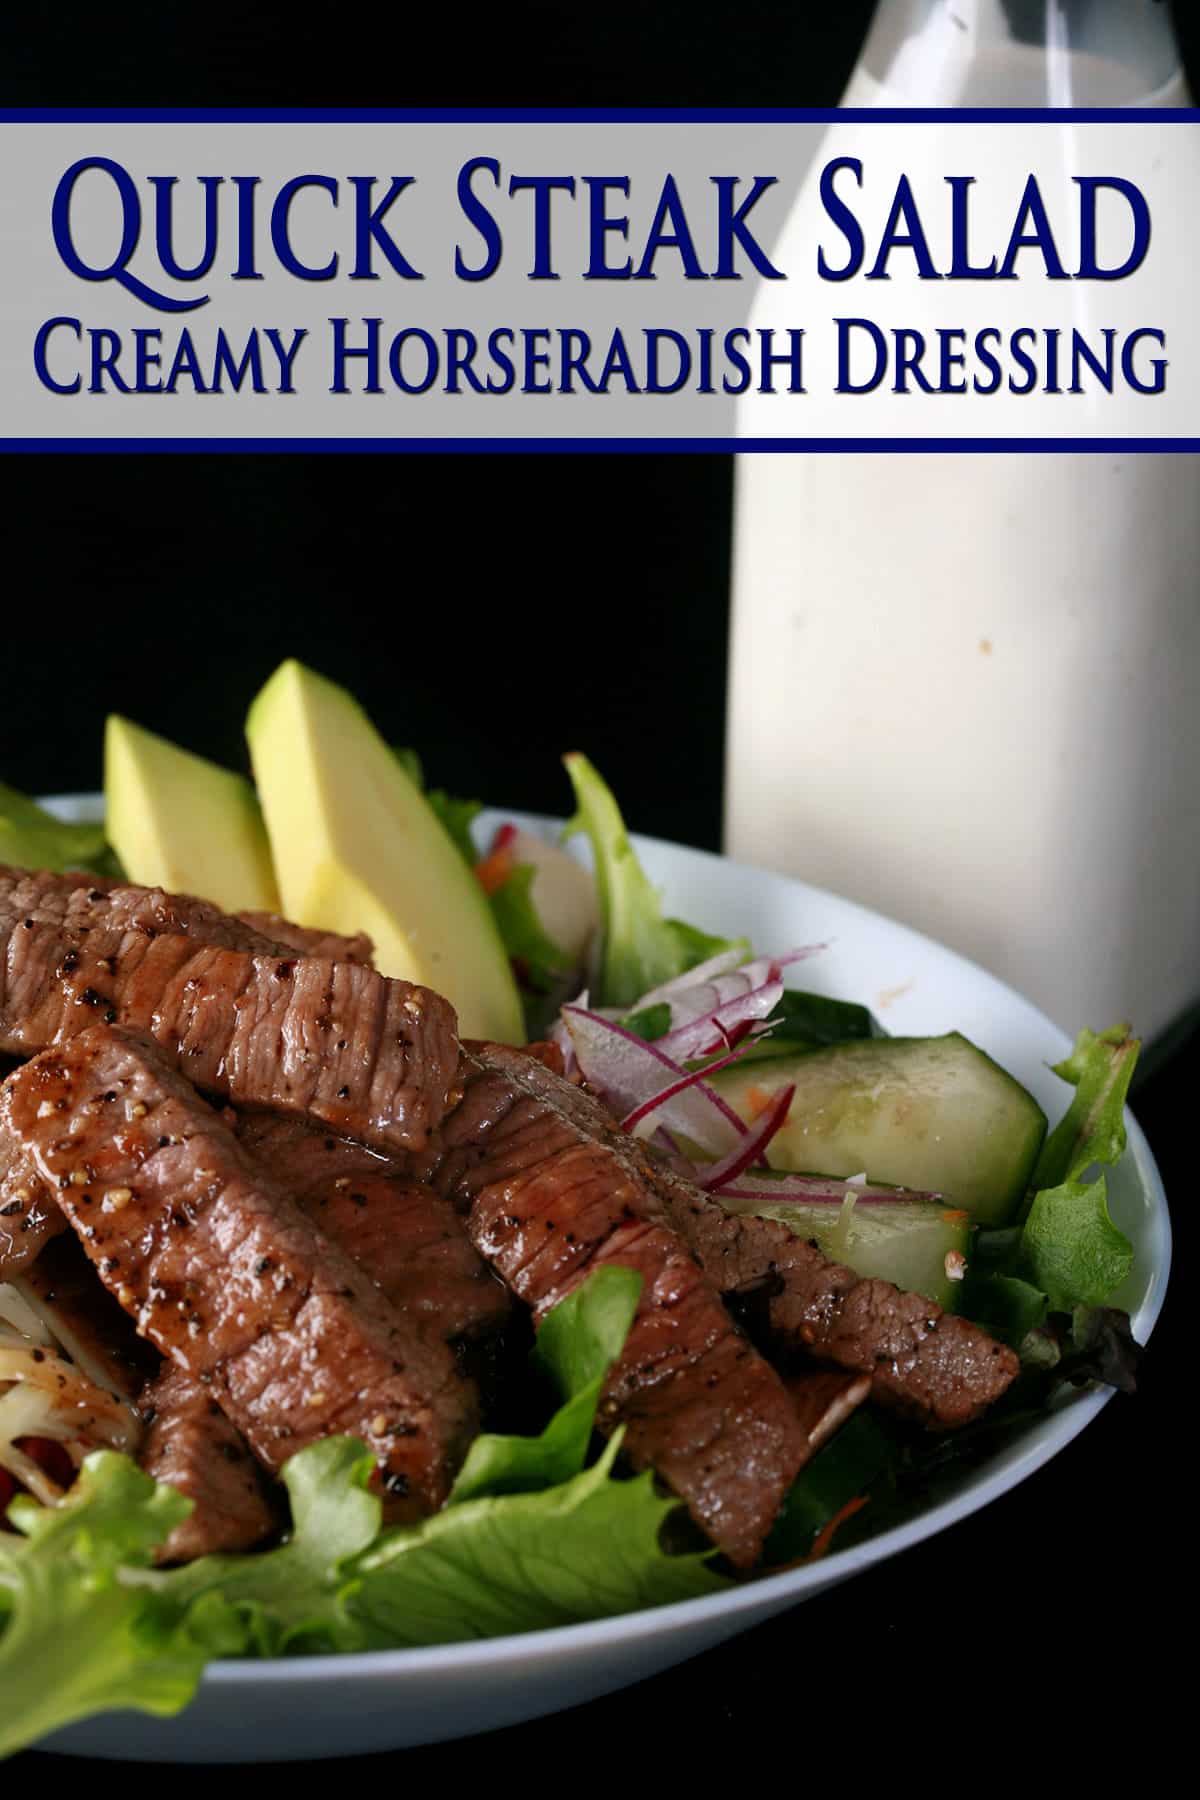 A bowl of steak salad with a jar of creamy horseradish dressing behind it.